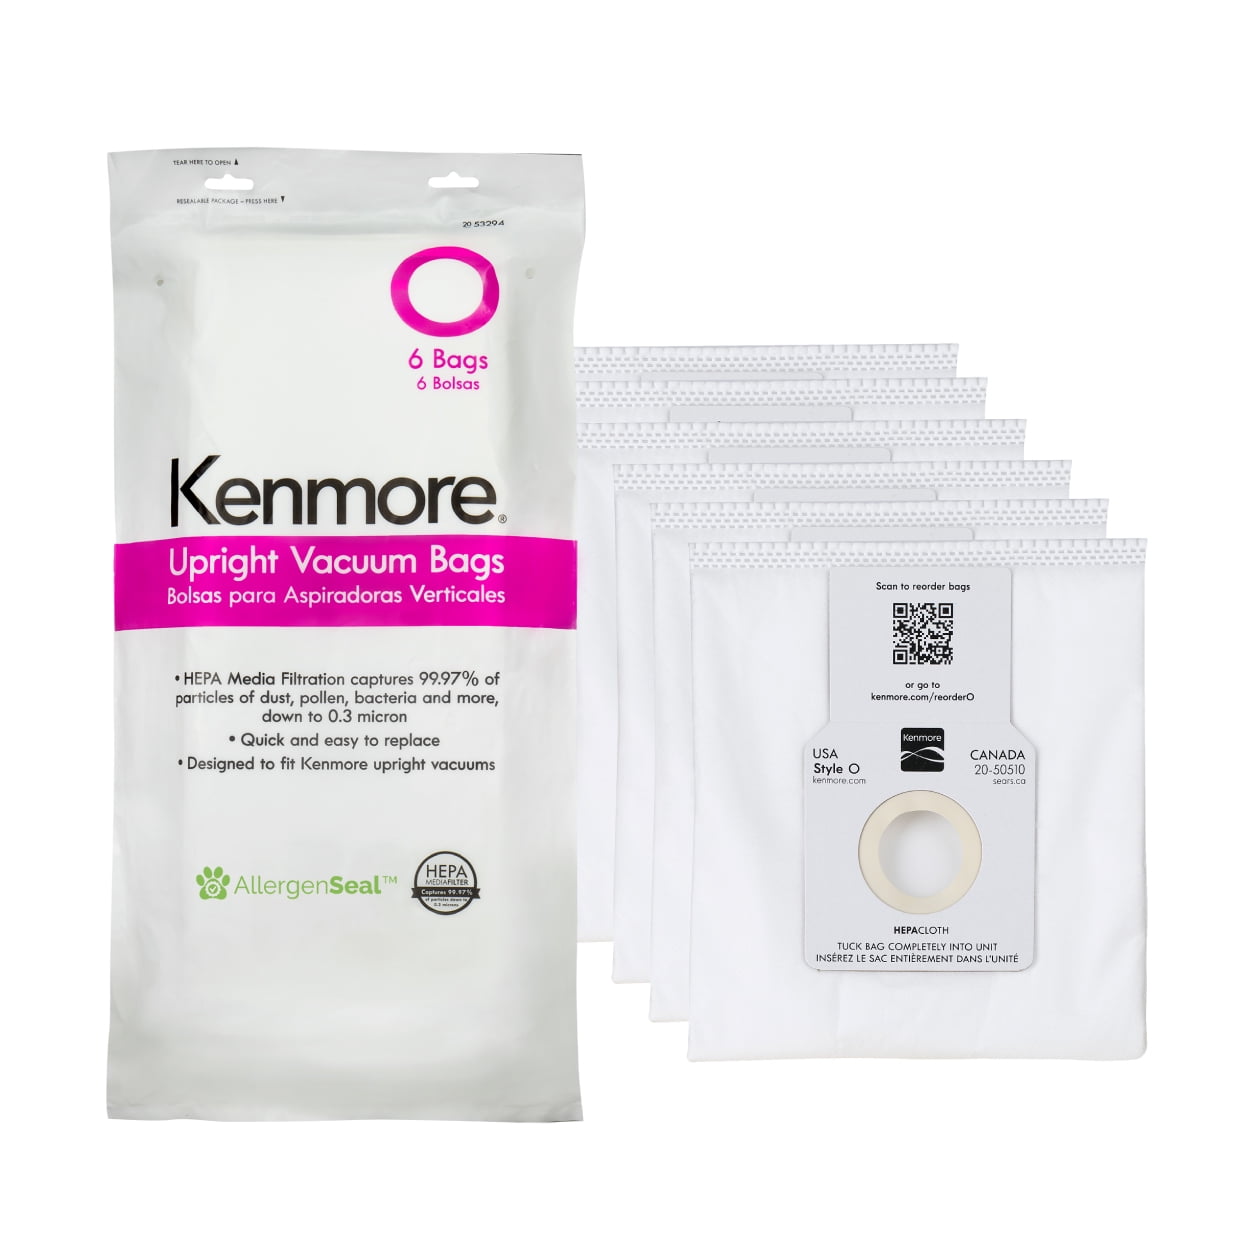 Kenmore 53292 Type Q/C Vacuum Bags HEPA for Canister Vacuums Style 6 Pack NEW